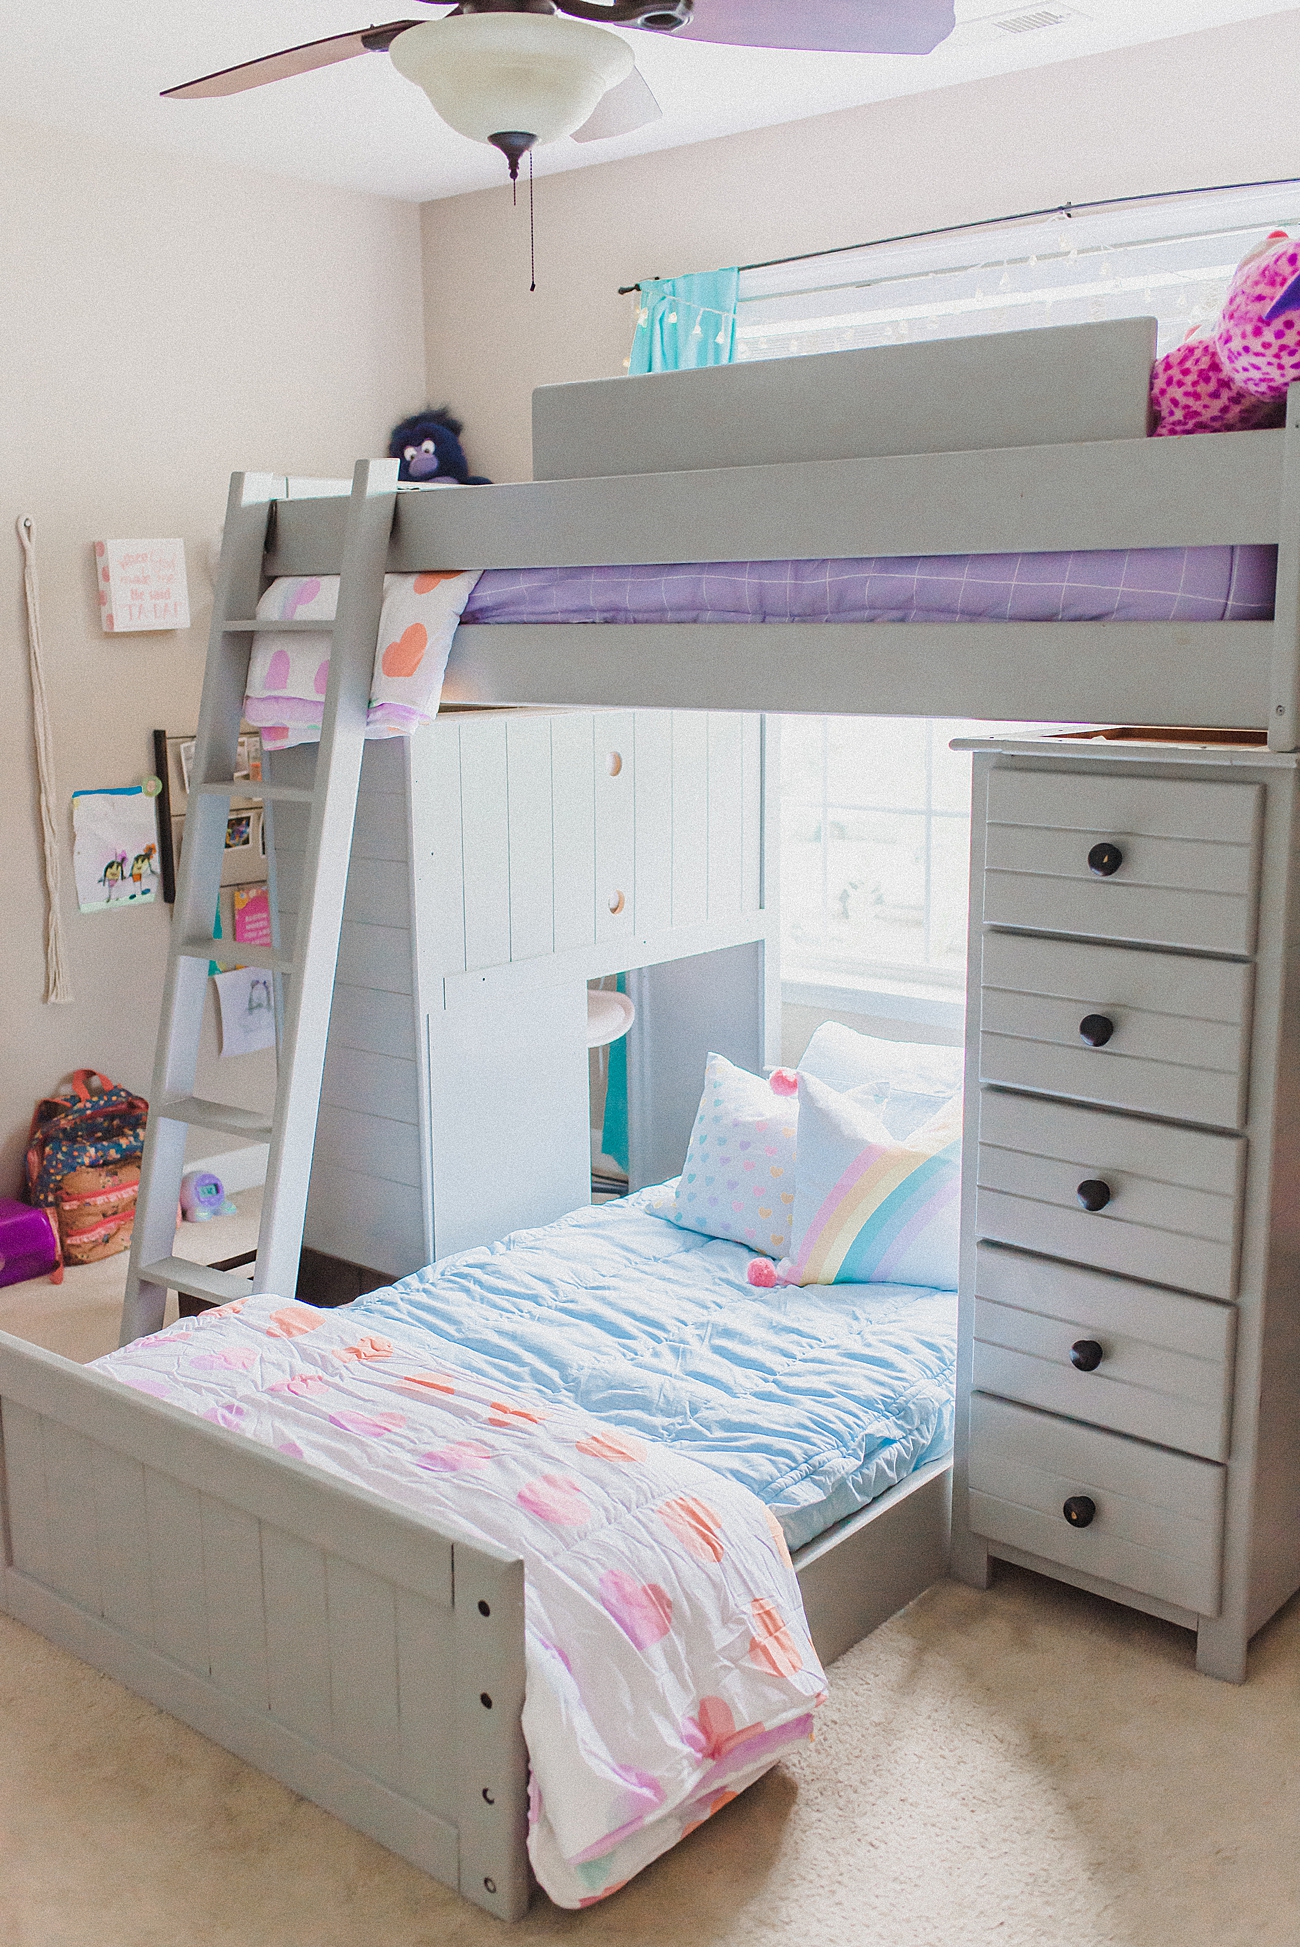 The Best Bedding For Bunk Beds Beddy, Bunk Bed King Reviews